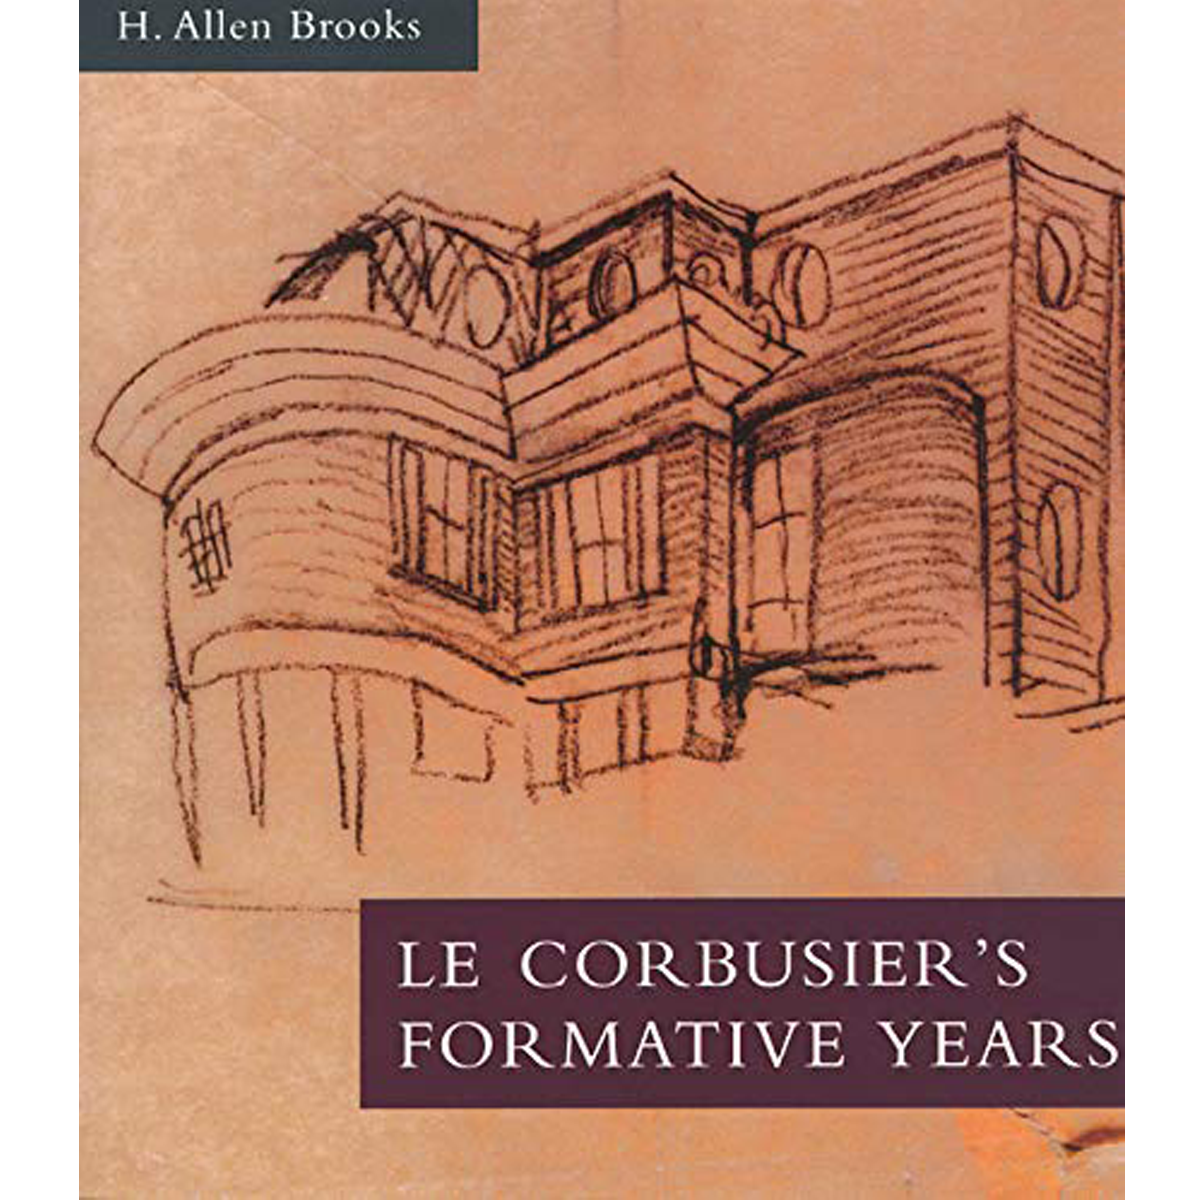 Le Corbusier’s Formative Years